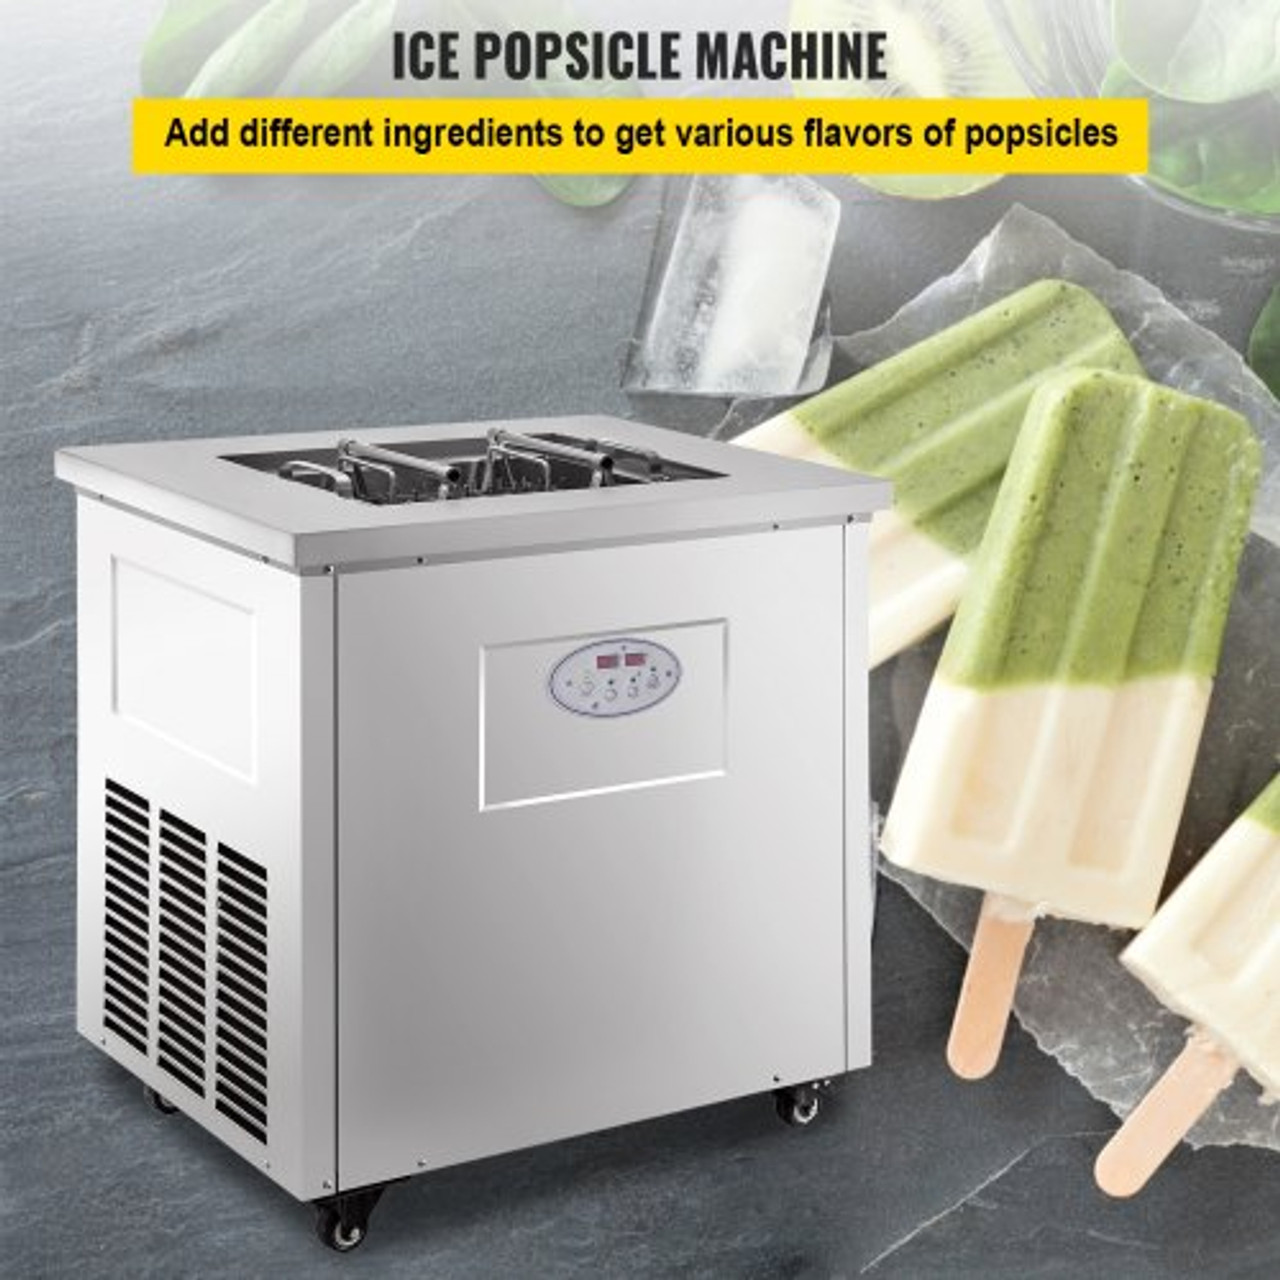 Mvckyi 4800pcs/day Commercial Ice Mold Popsicle Machine, 110ML/Stick Holder  Stainless Steel Ice Pops Maker with 30 pcs/mold set, Multiple use Frozen